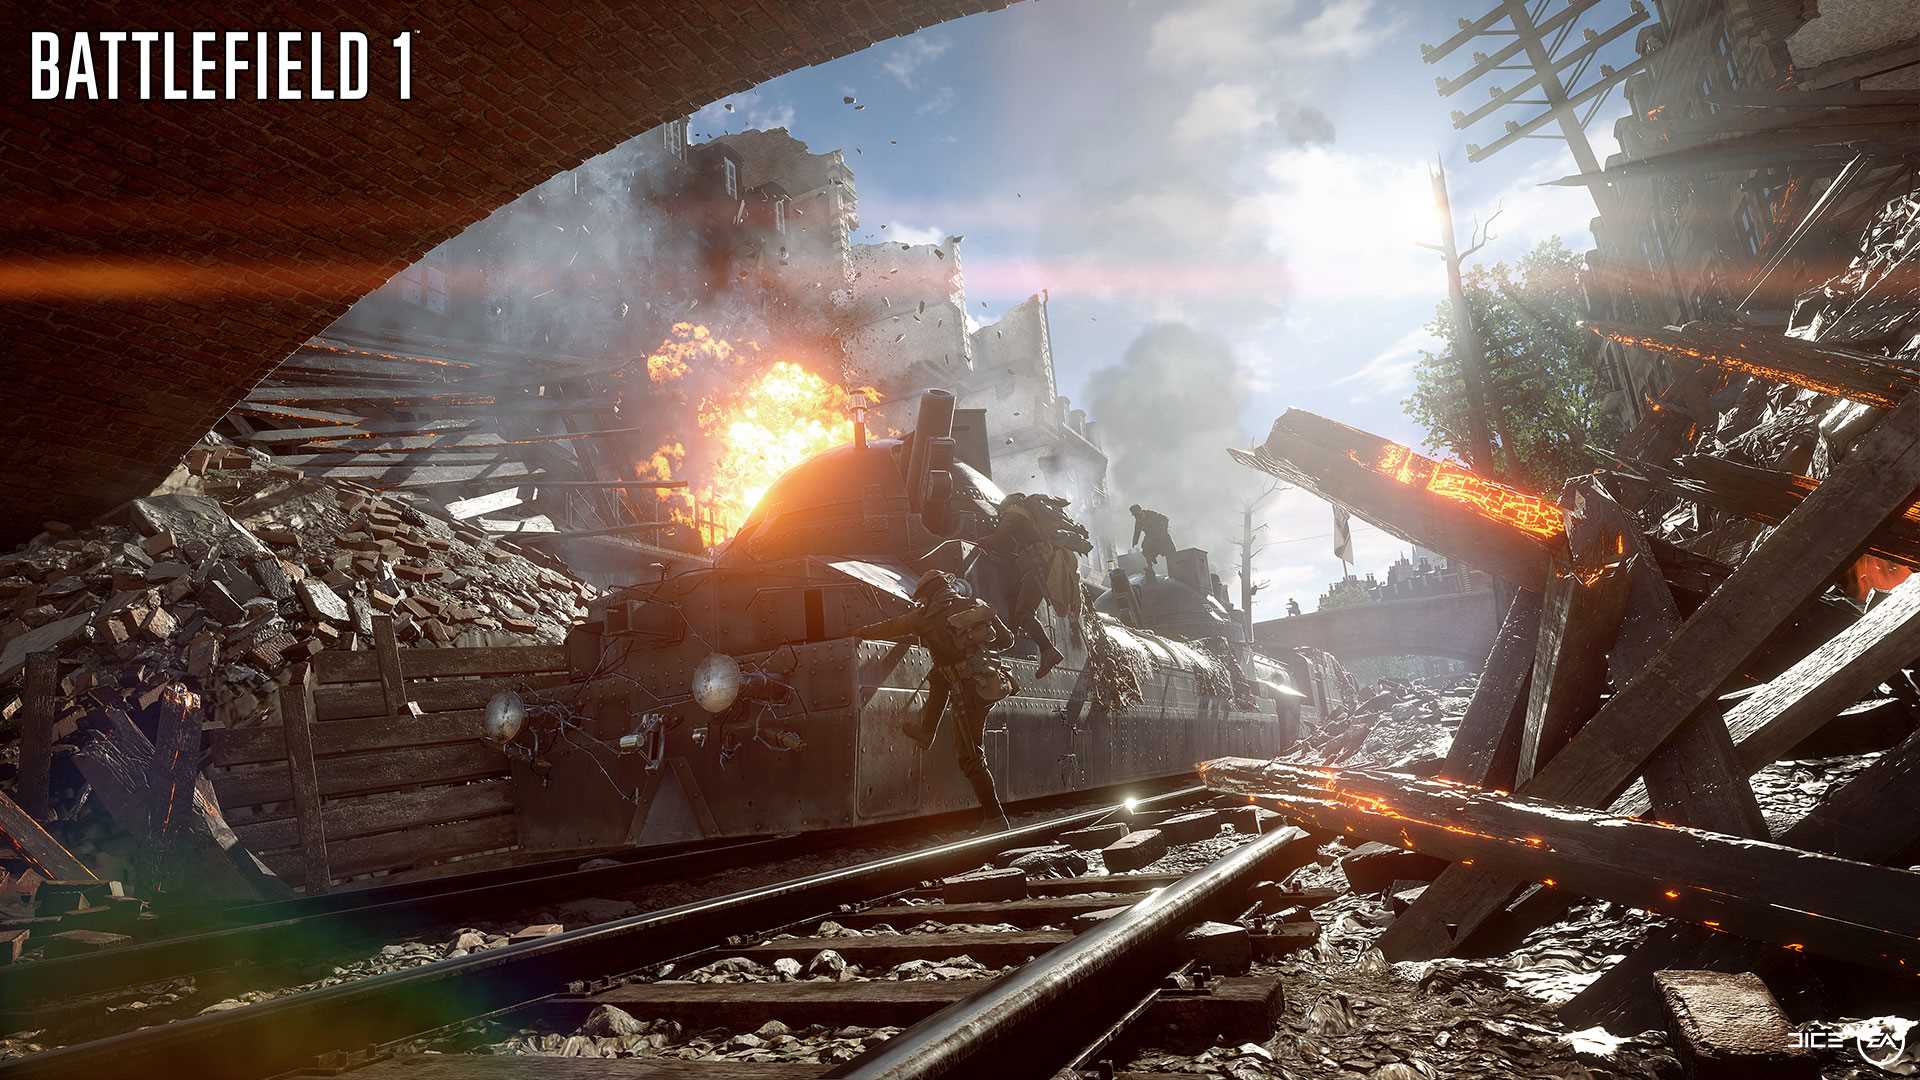 Preview: Battlefield 1's alpha is extremely promising